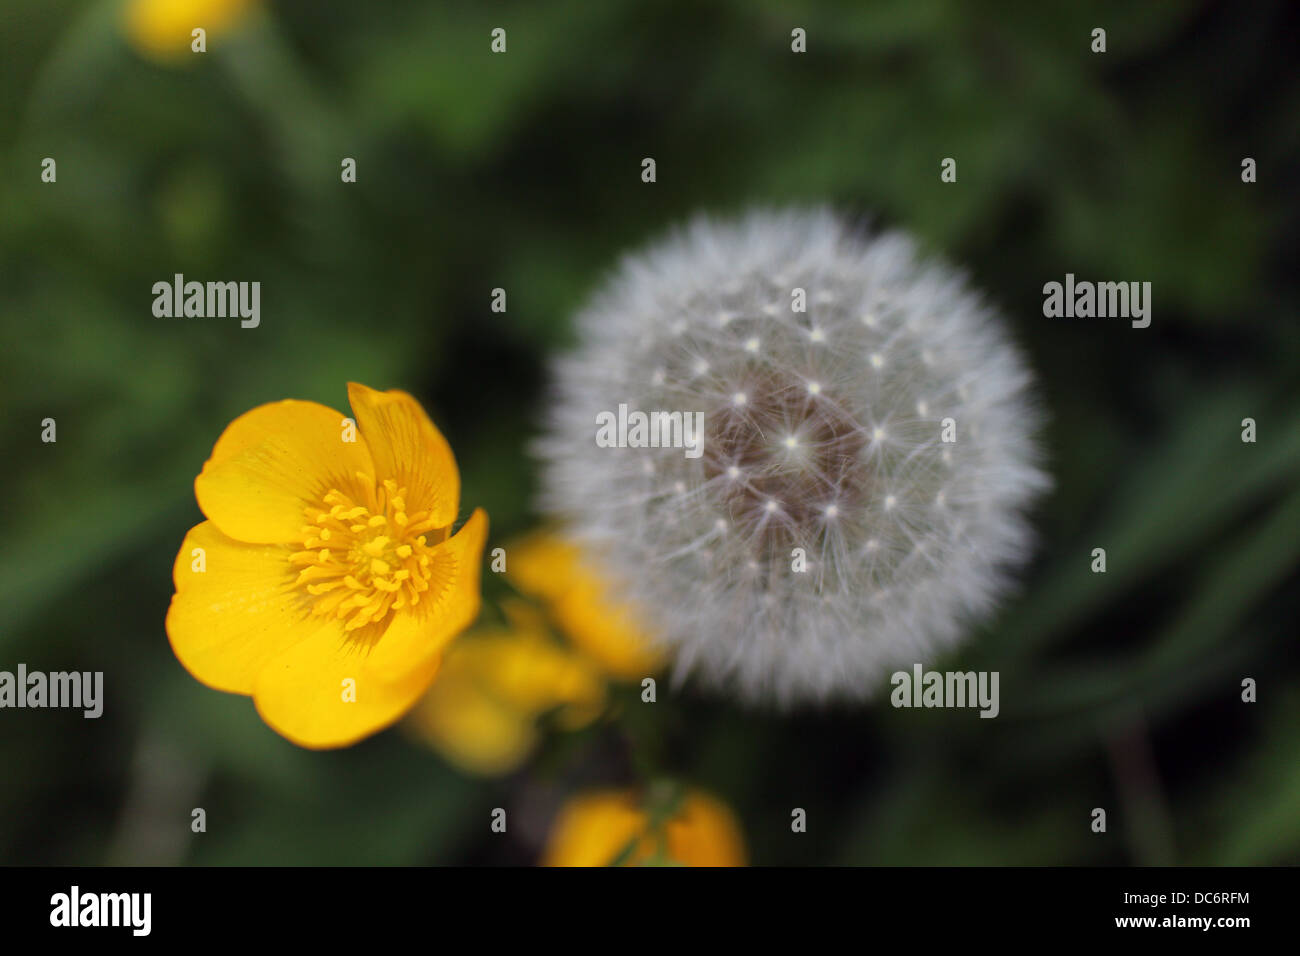 Taraxacum officinale - common dandelion - round balls of silver tufted fruits - blowballs - clocks - Asteracea - with meadow but Stock Photo